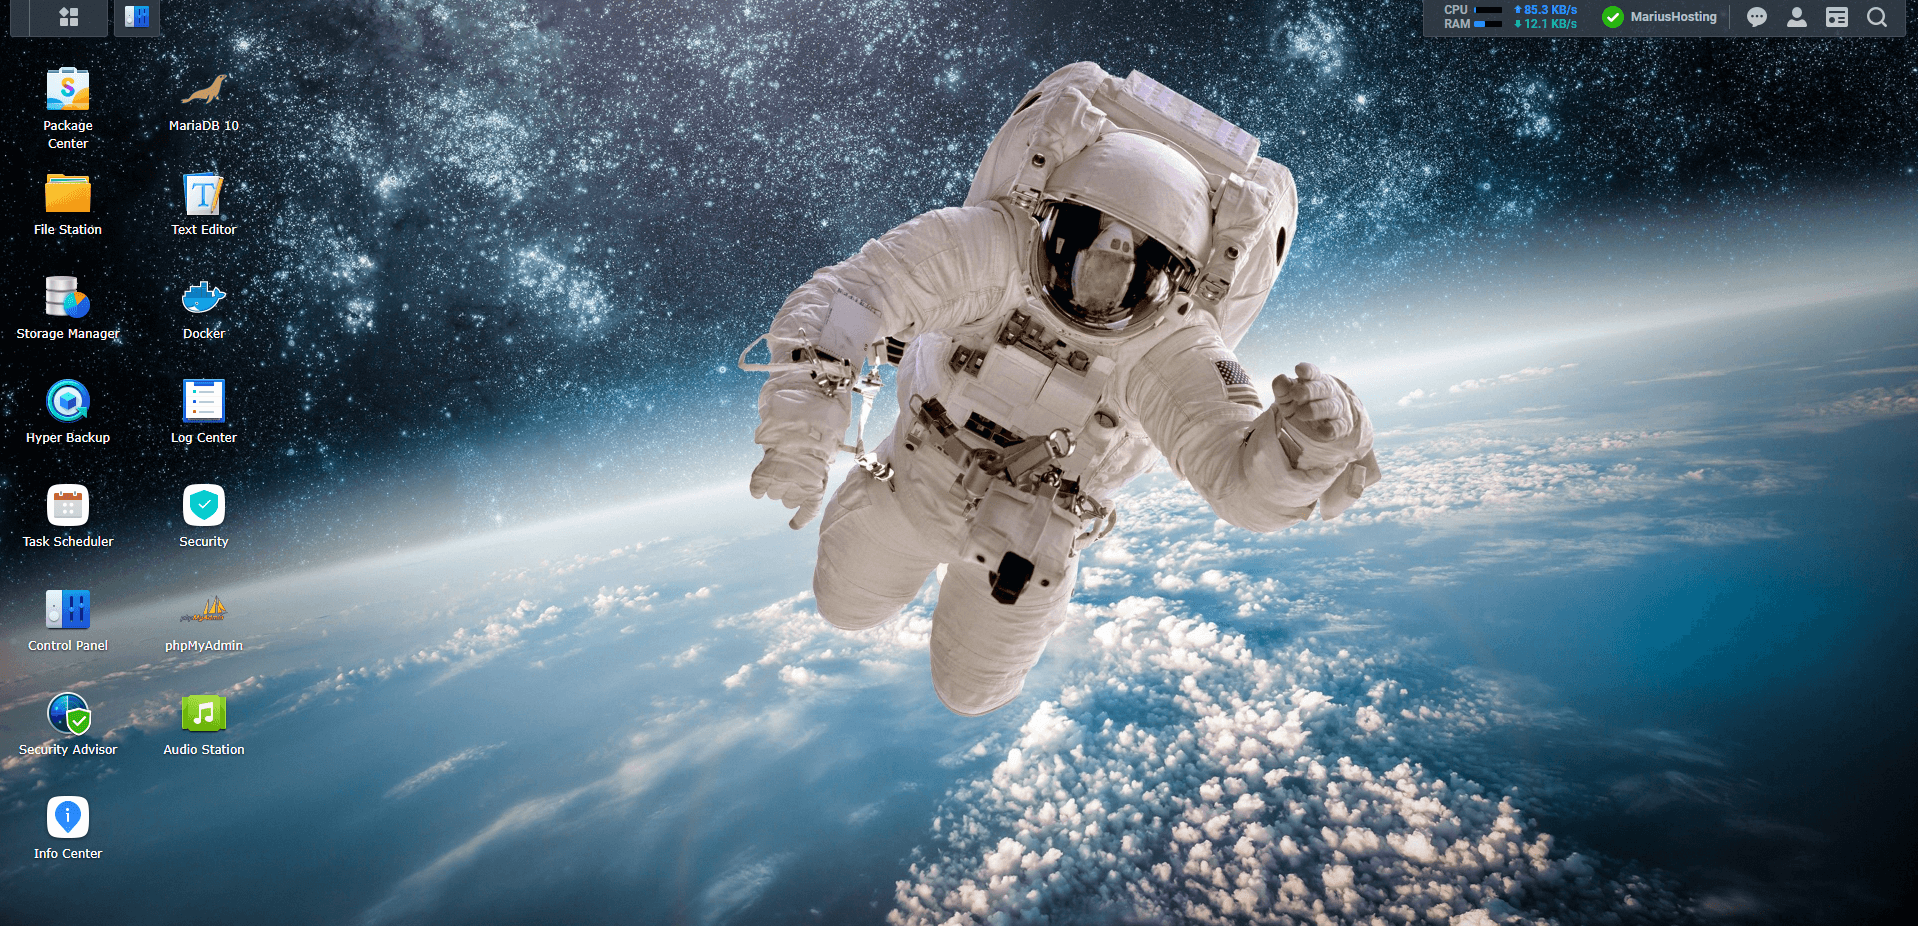 Synology: Astronaut Wallpapers For DSM